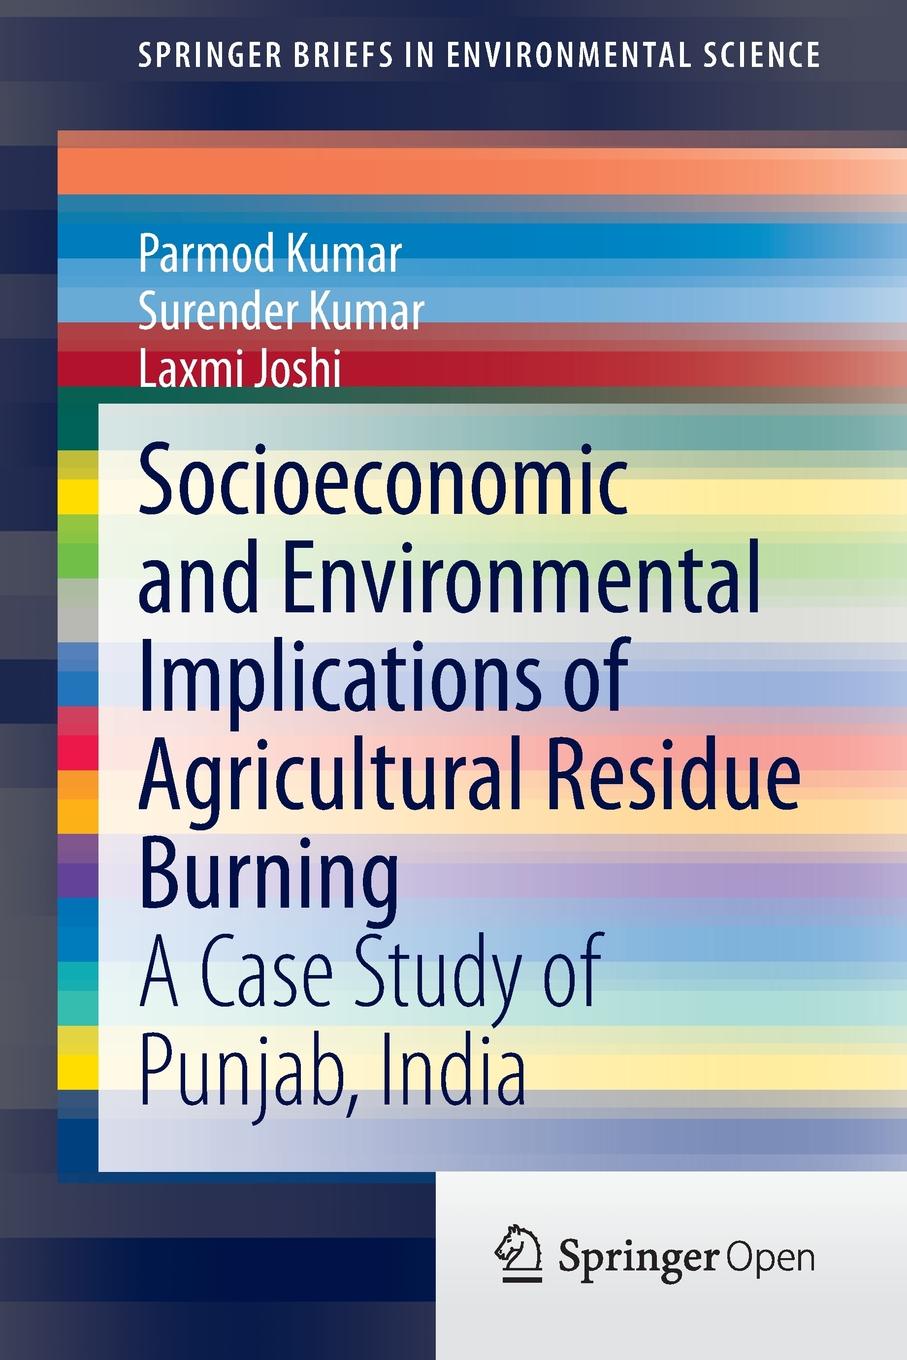 Socioeconomic and Environmental Implications of Agricultural Residue Burning. A Case Study of Punjab, India